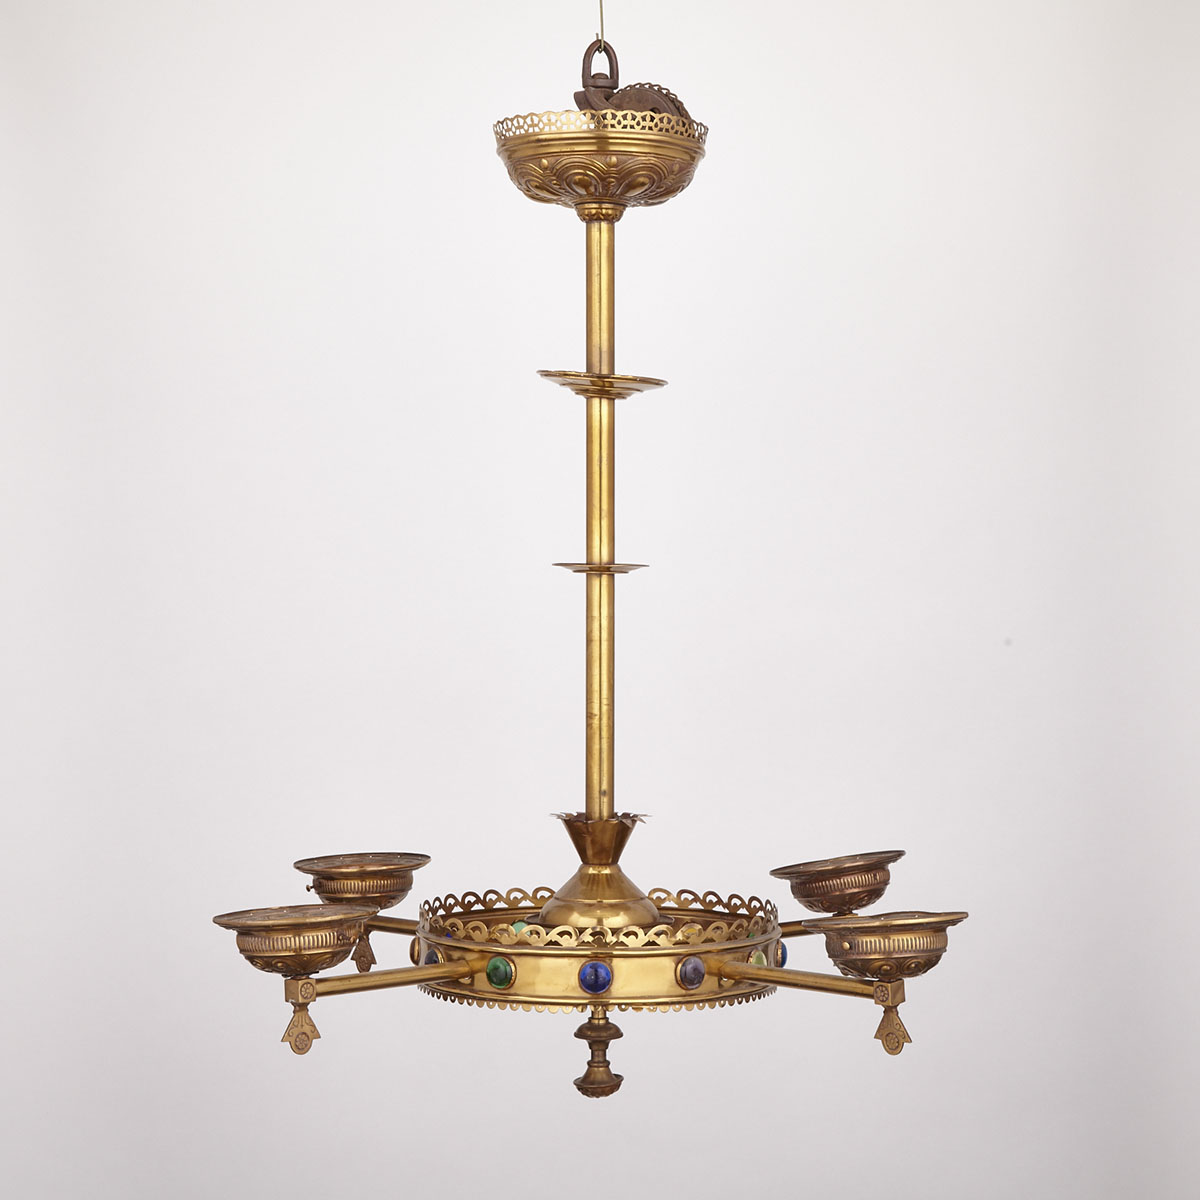 Victorian Aesthetic Movement Brass Four Lamp Chandelier, 2nd half, 19th century